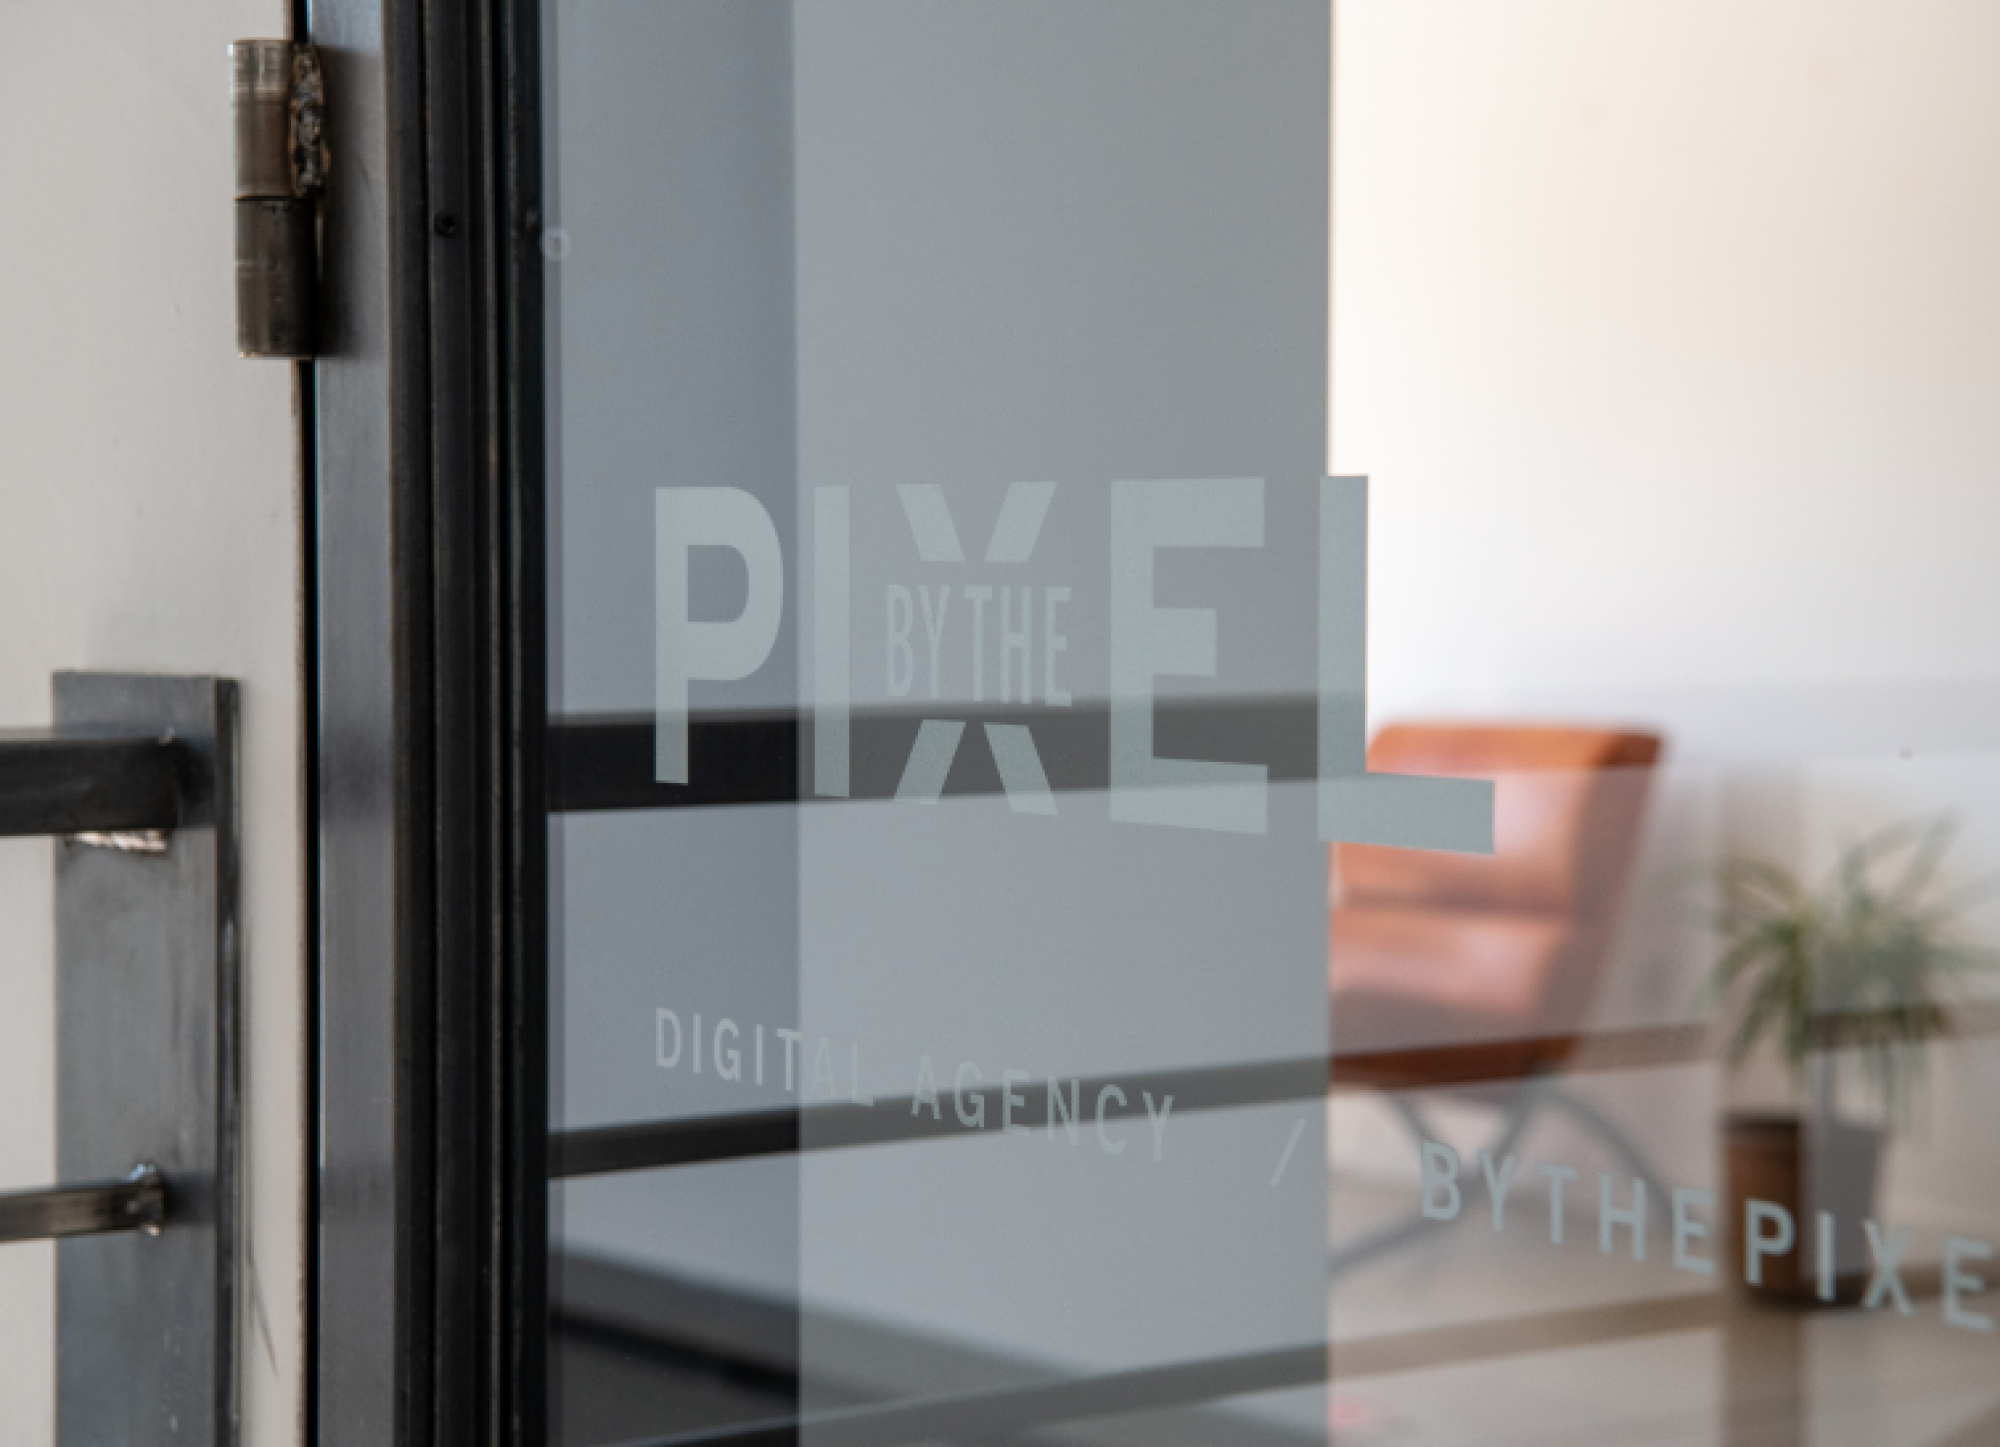 A glass door with the By the Pixel logo